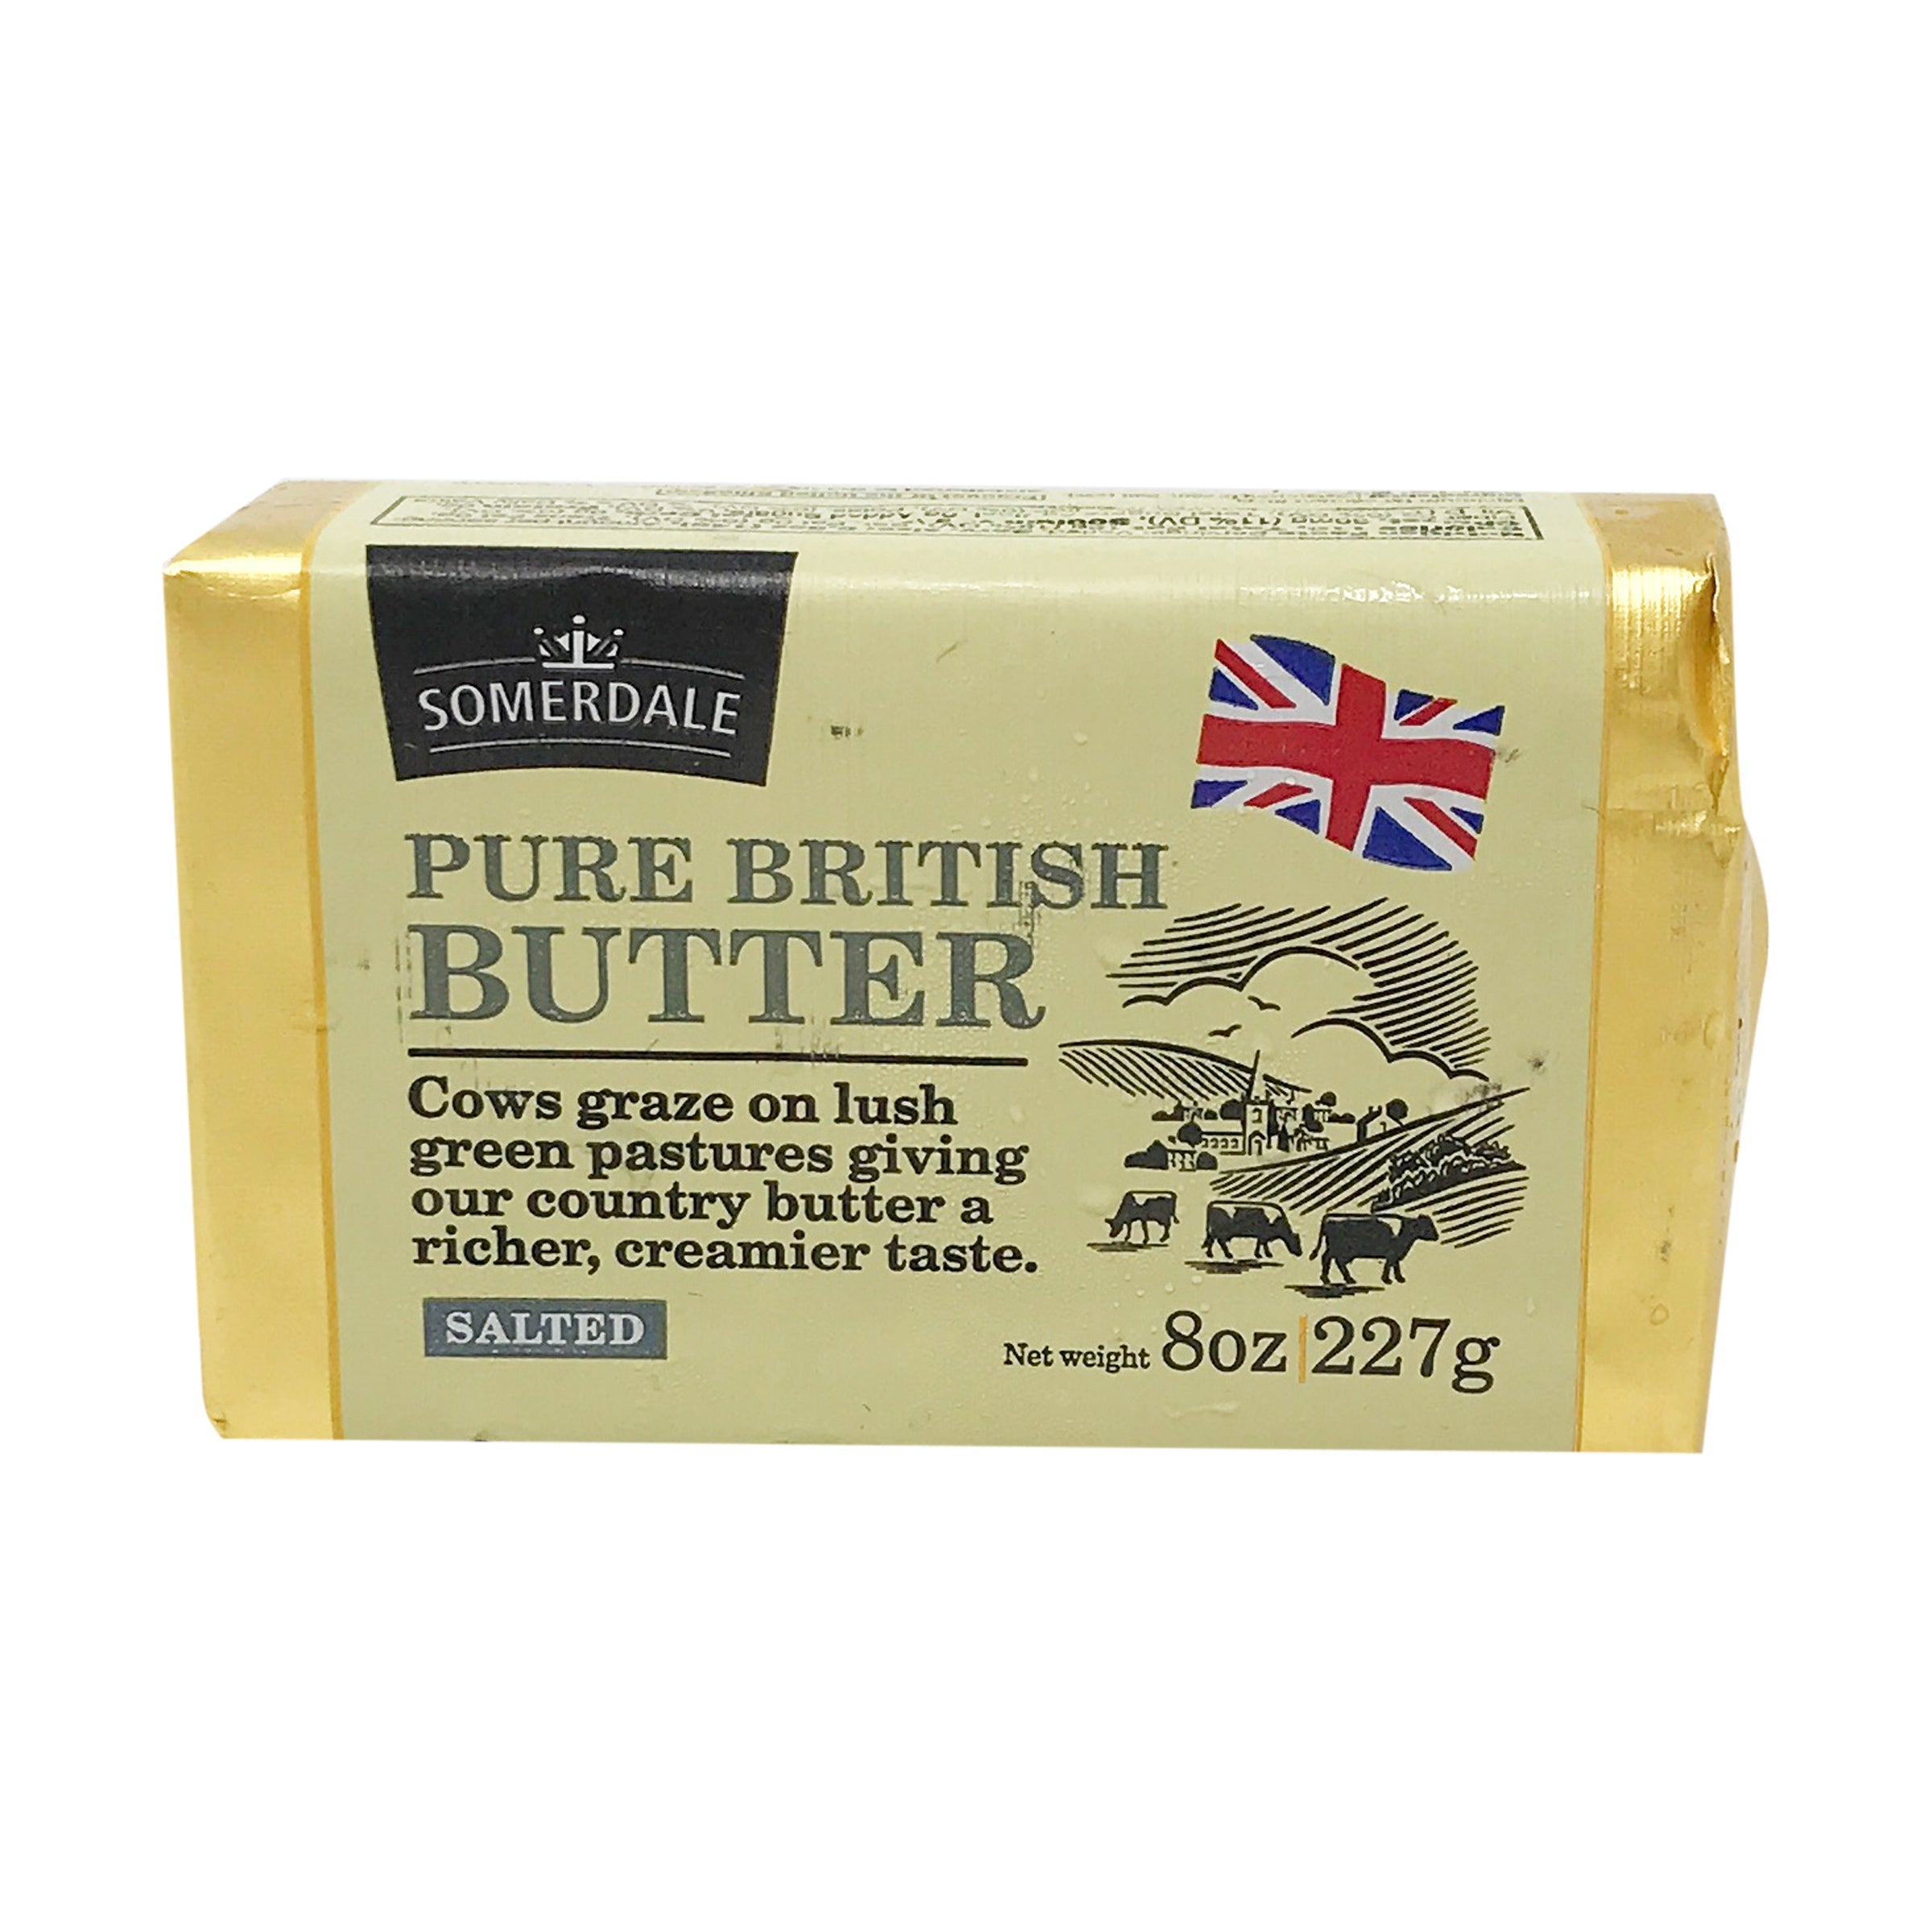 Somerdale Pure British Butter Salted